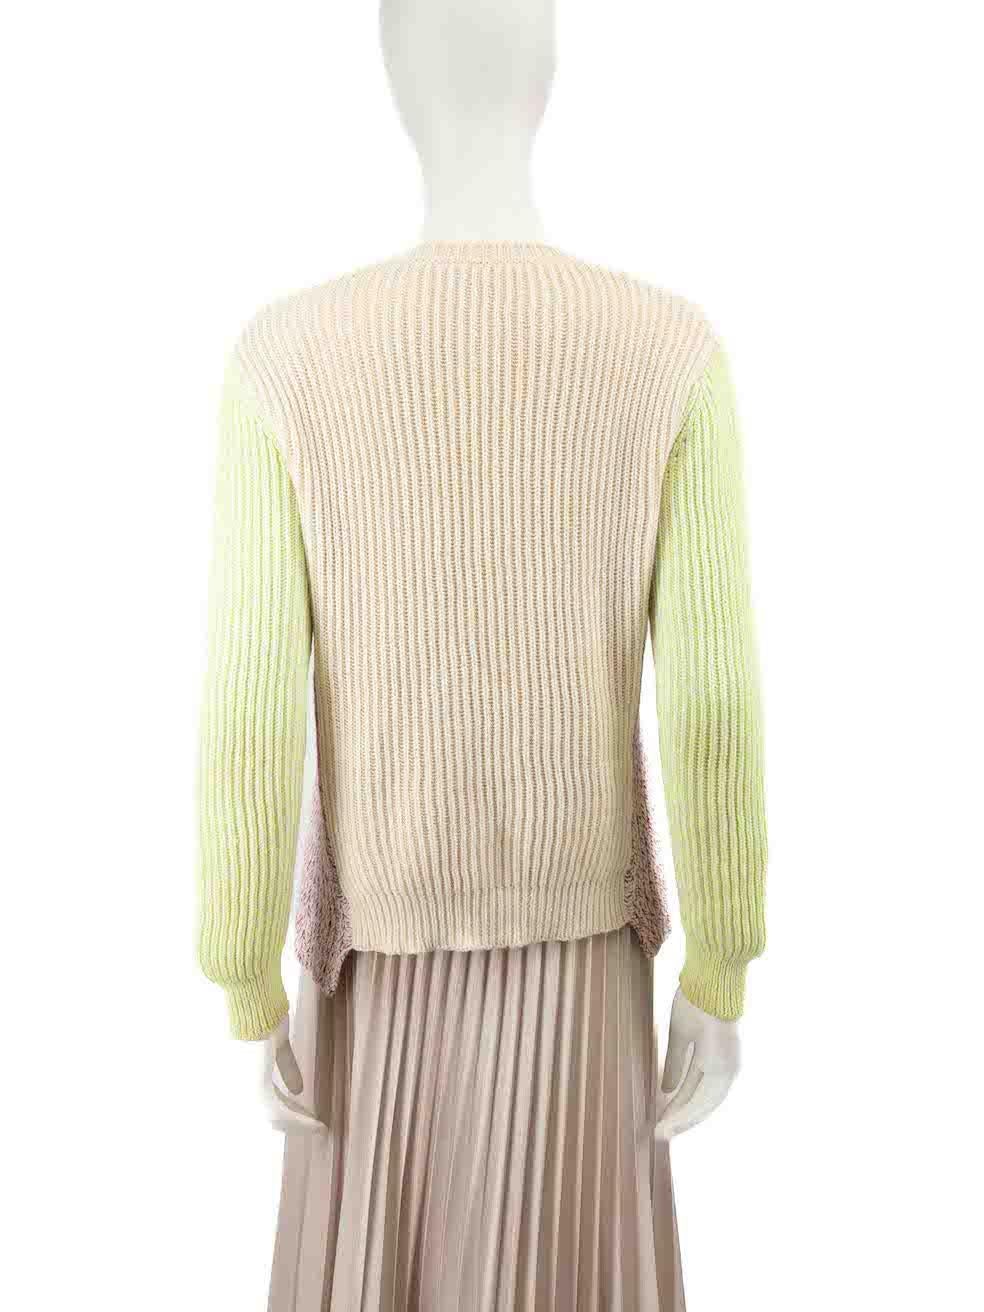 Stella McCartney Neon Colour Block Knit Sweater Size XXS In Good Condition For Sale In London, GB